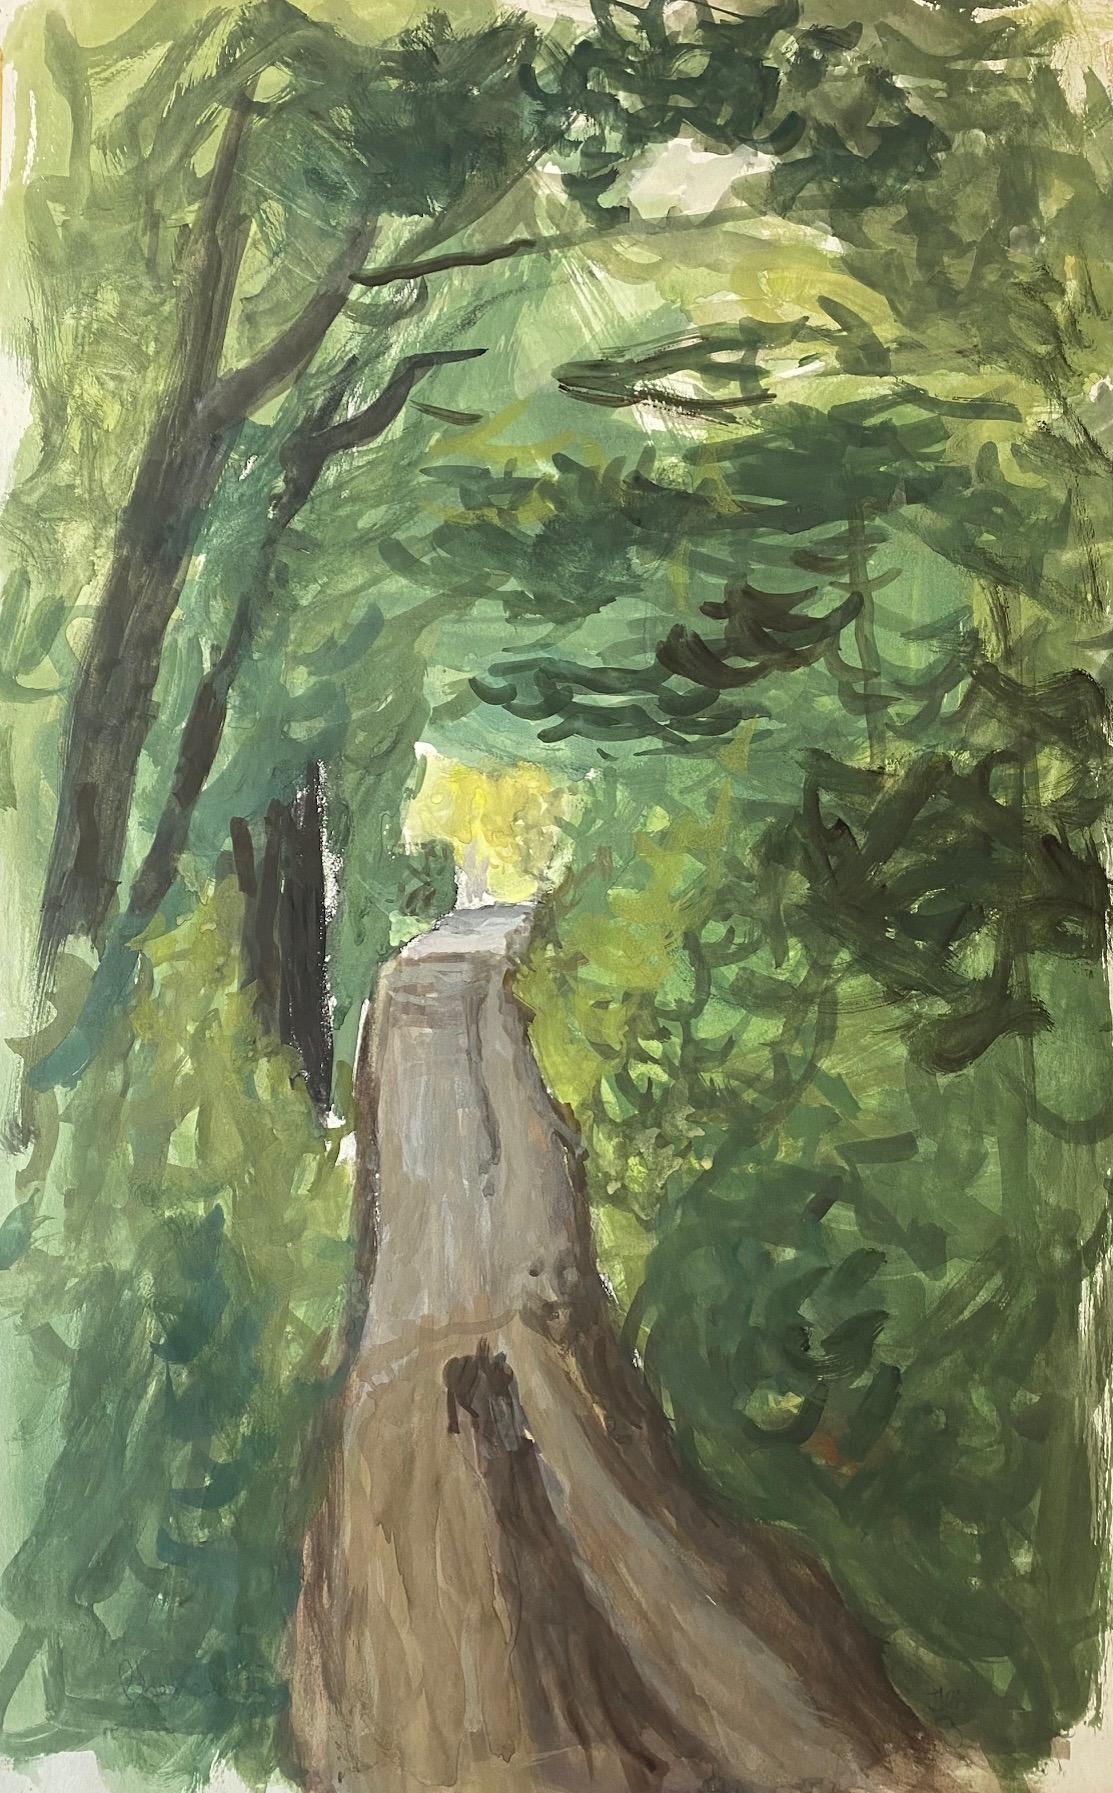 Path under the woods by Charles Goetz - Watercolor 37x56 cm